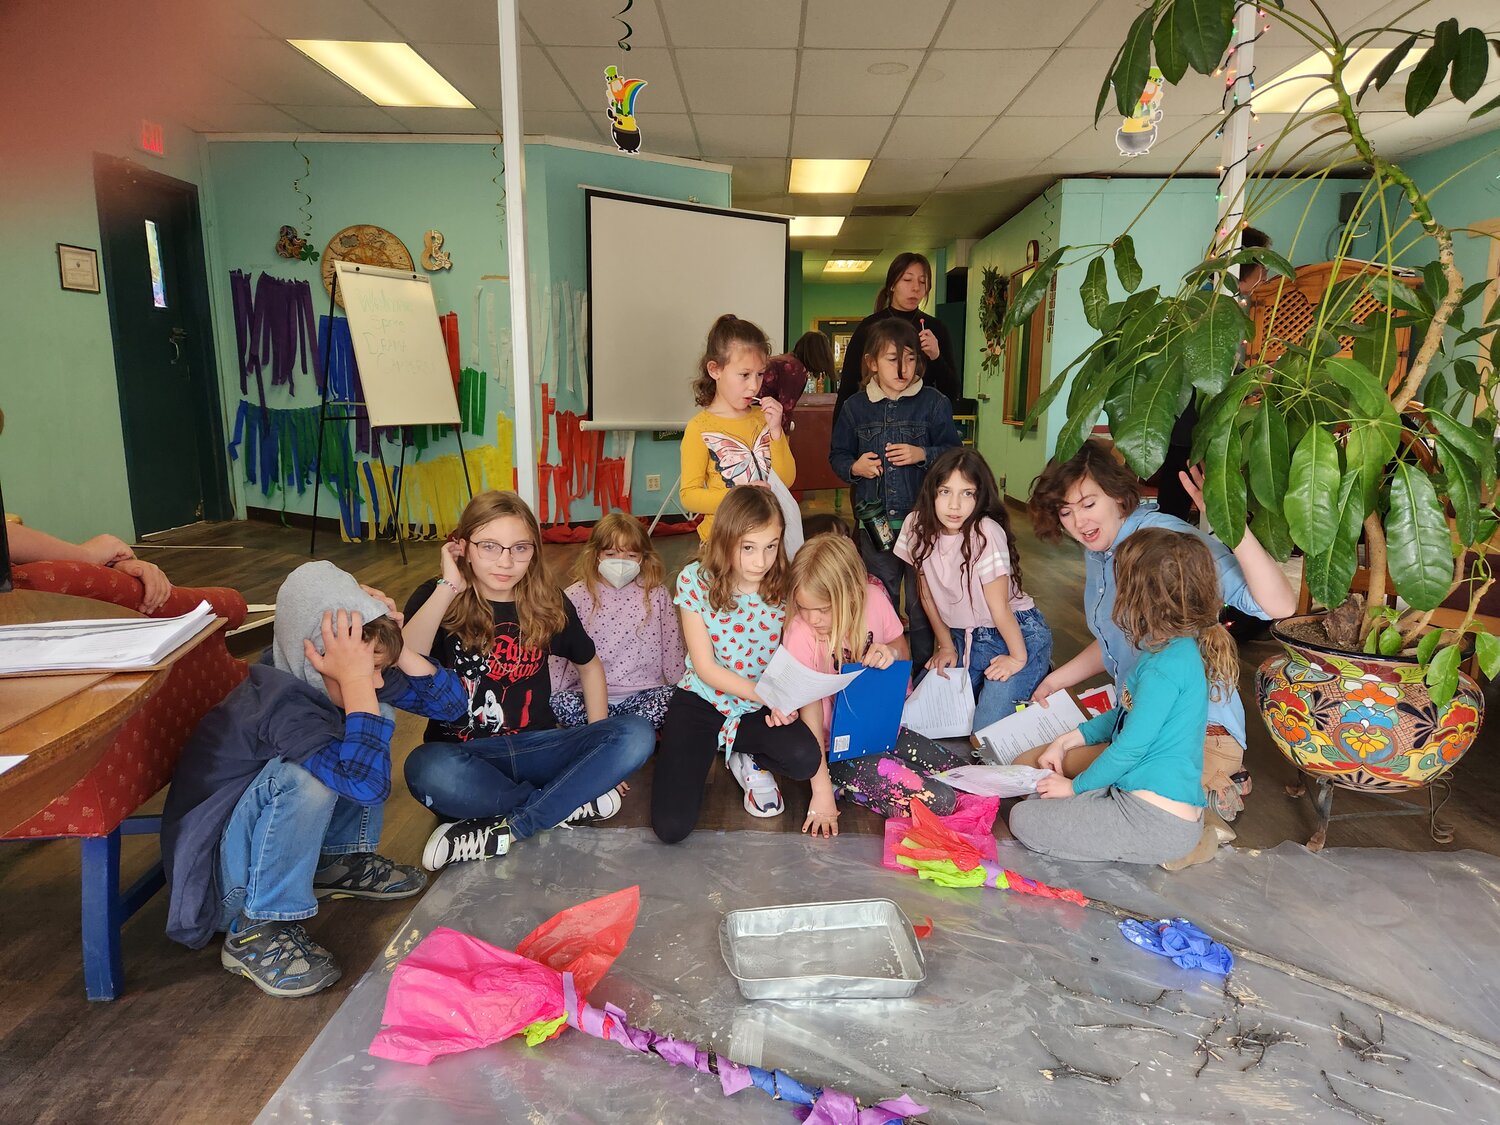 Hallie Harris, with Spring Drama Campers working on art project.